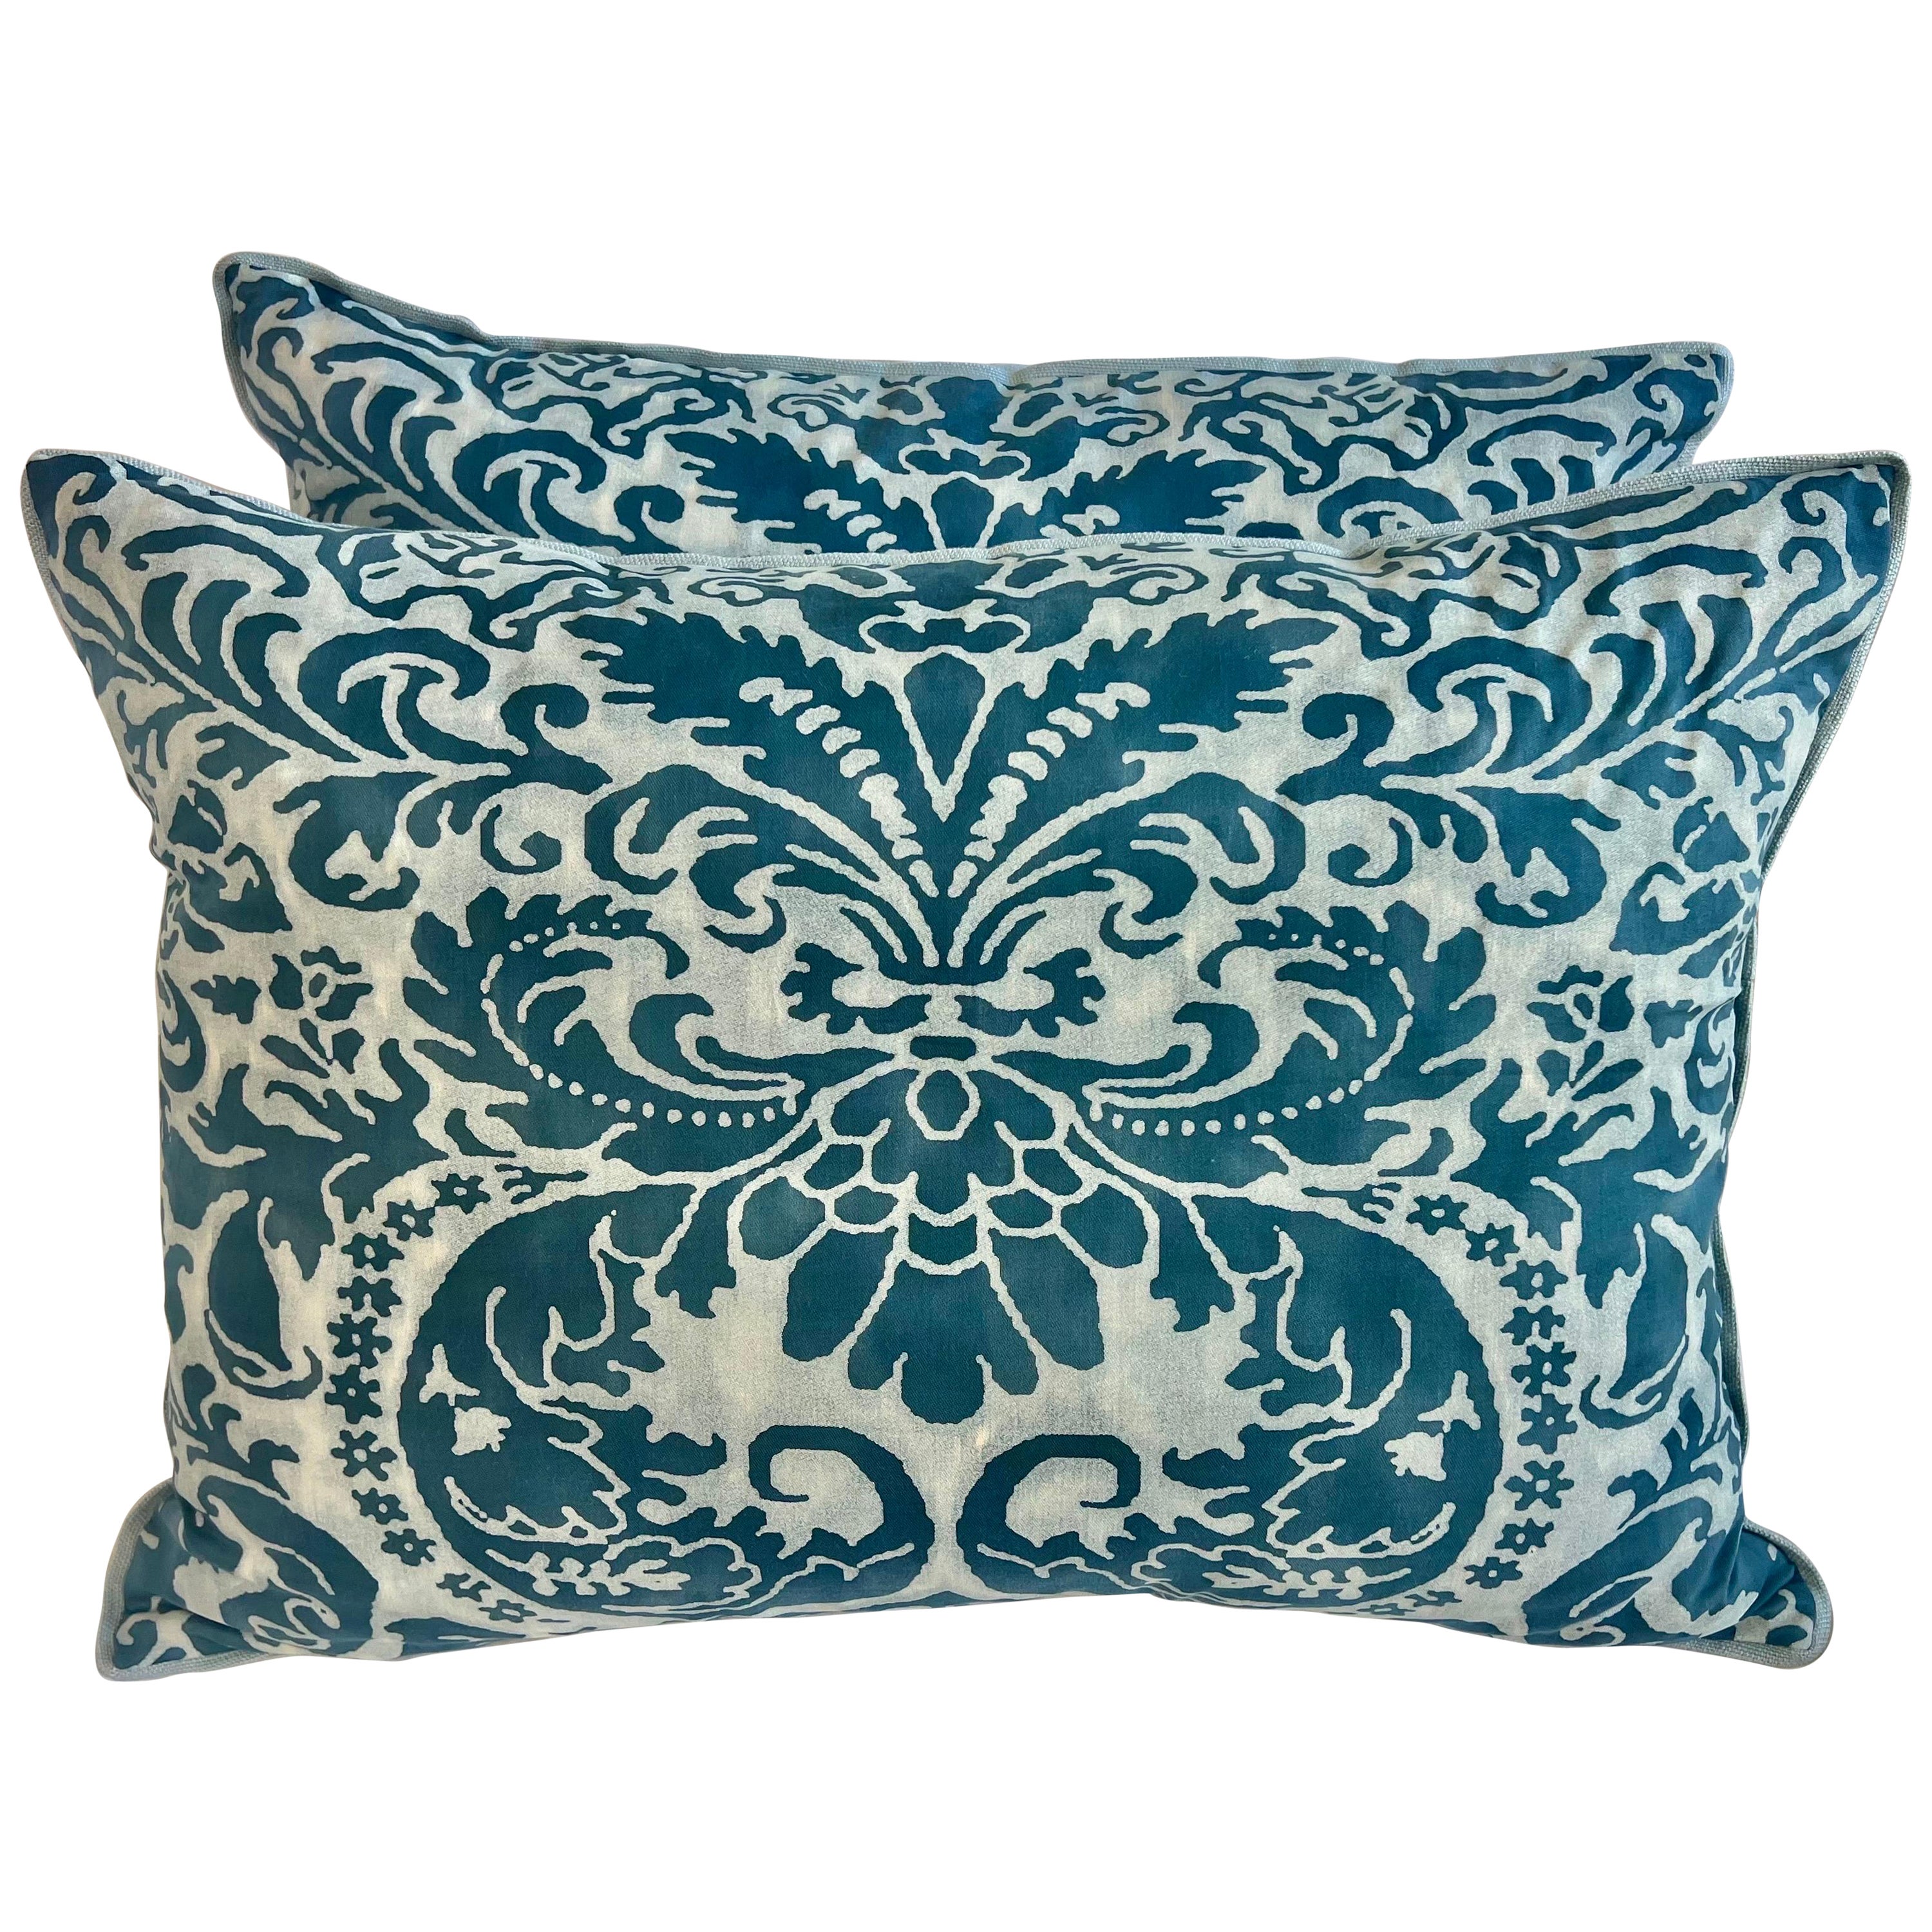 Pair of Blue Caravaggio Patterned Fortuny Pillows For Sale